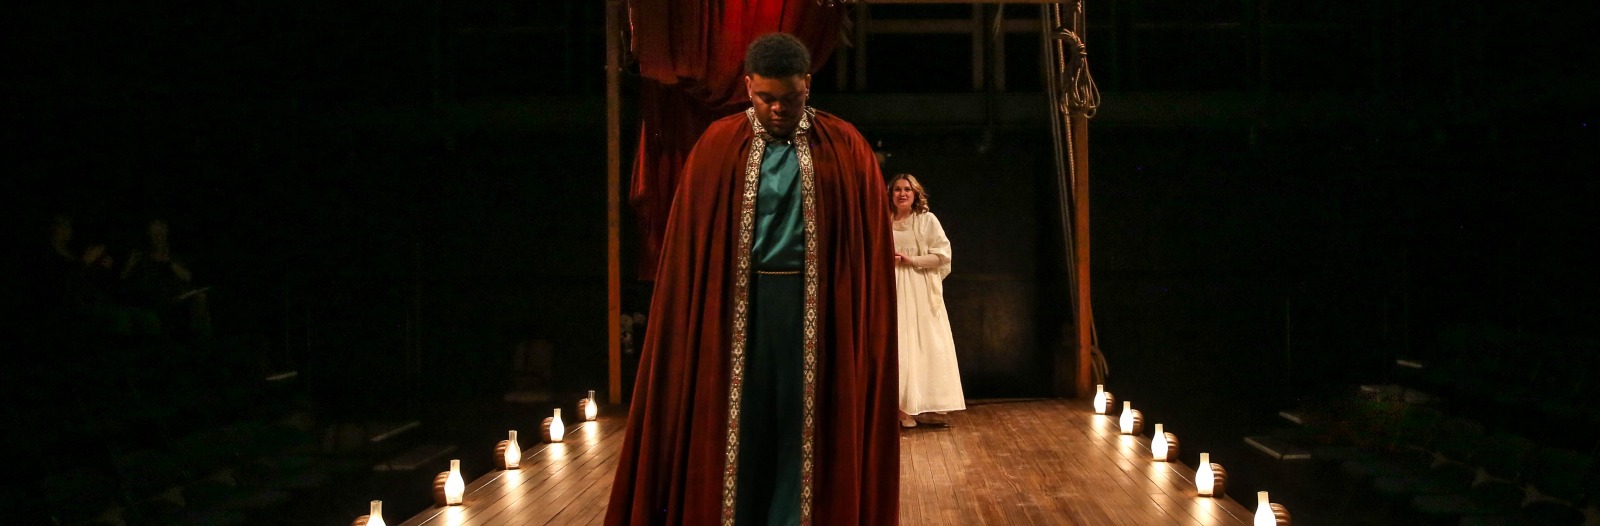 A performer in a red cloak treads between period-style footlights